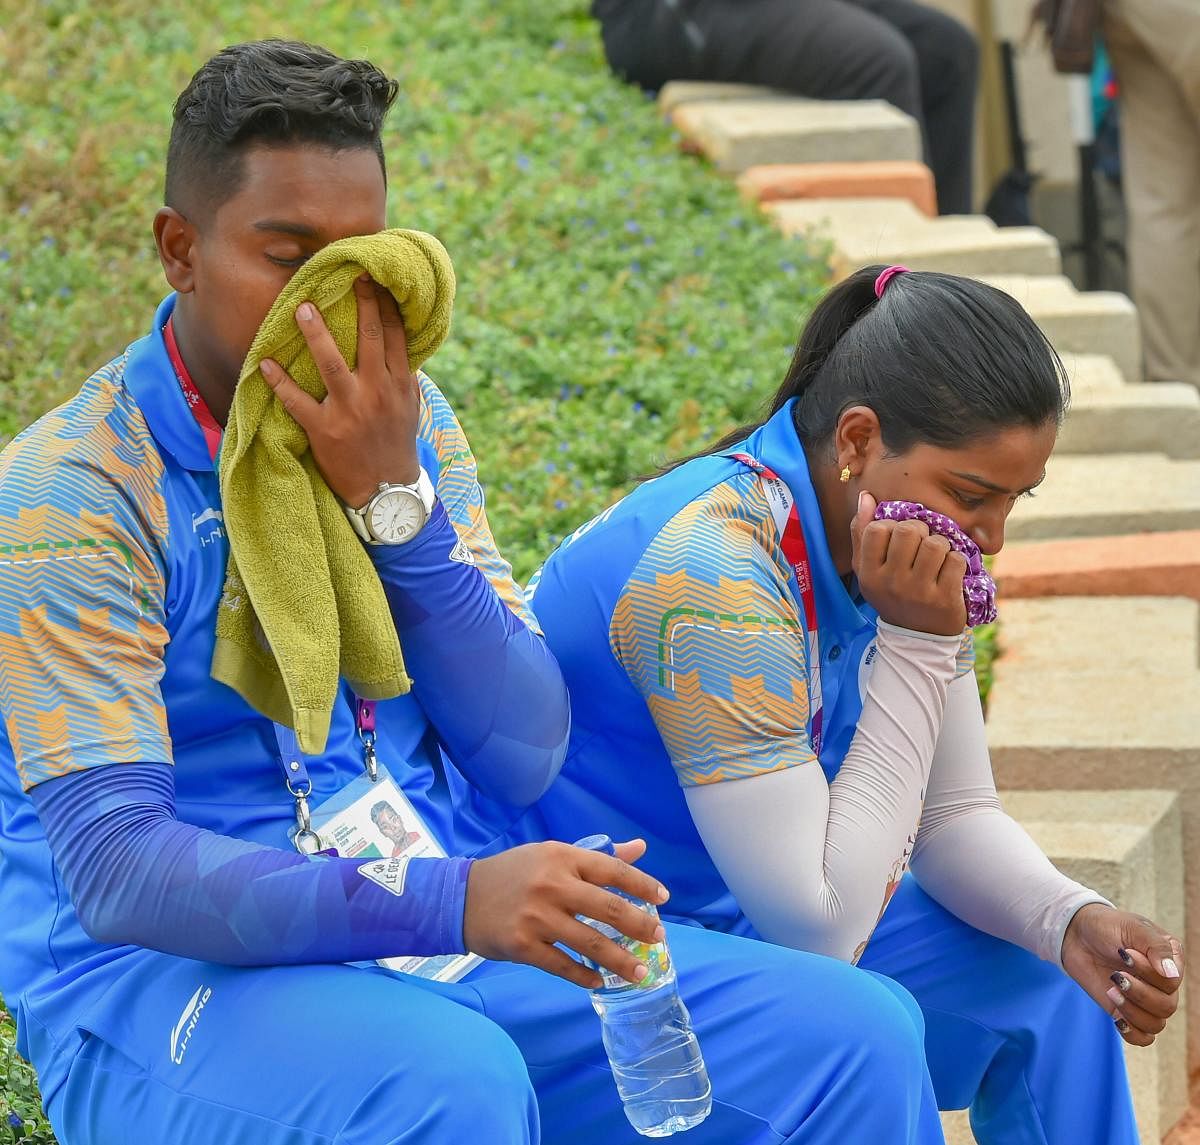 Indian archers Deepika Kumari (right) and Atanu Das look dejected after going down in the recurve in mix team event at the Asian Games on Friday. PTI